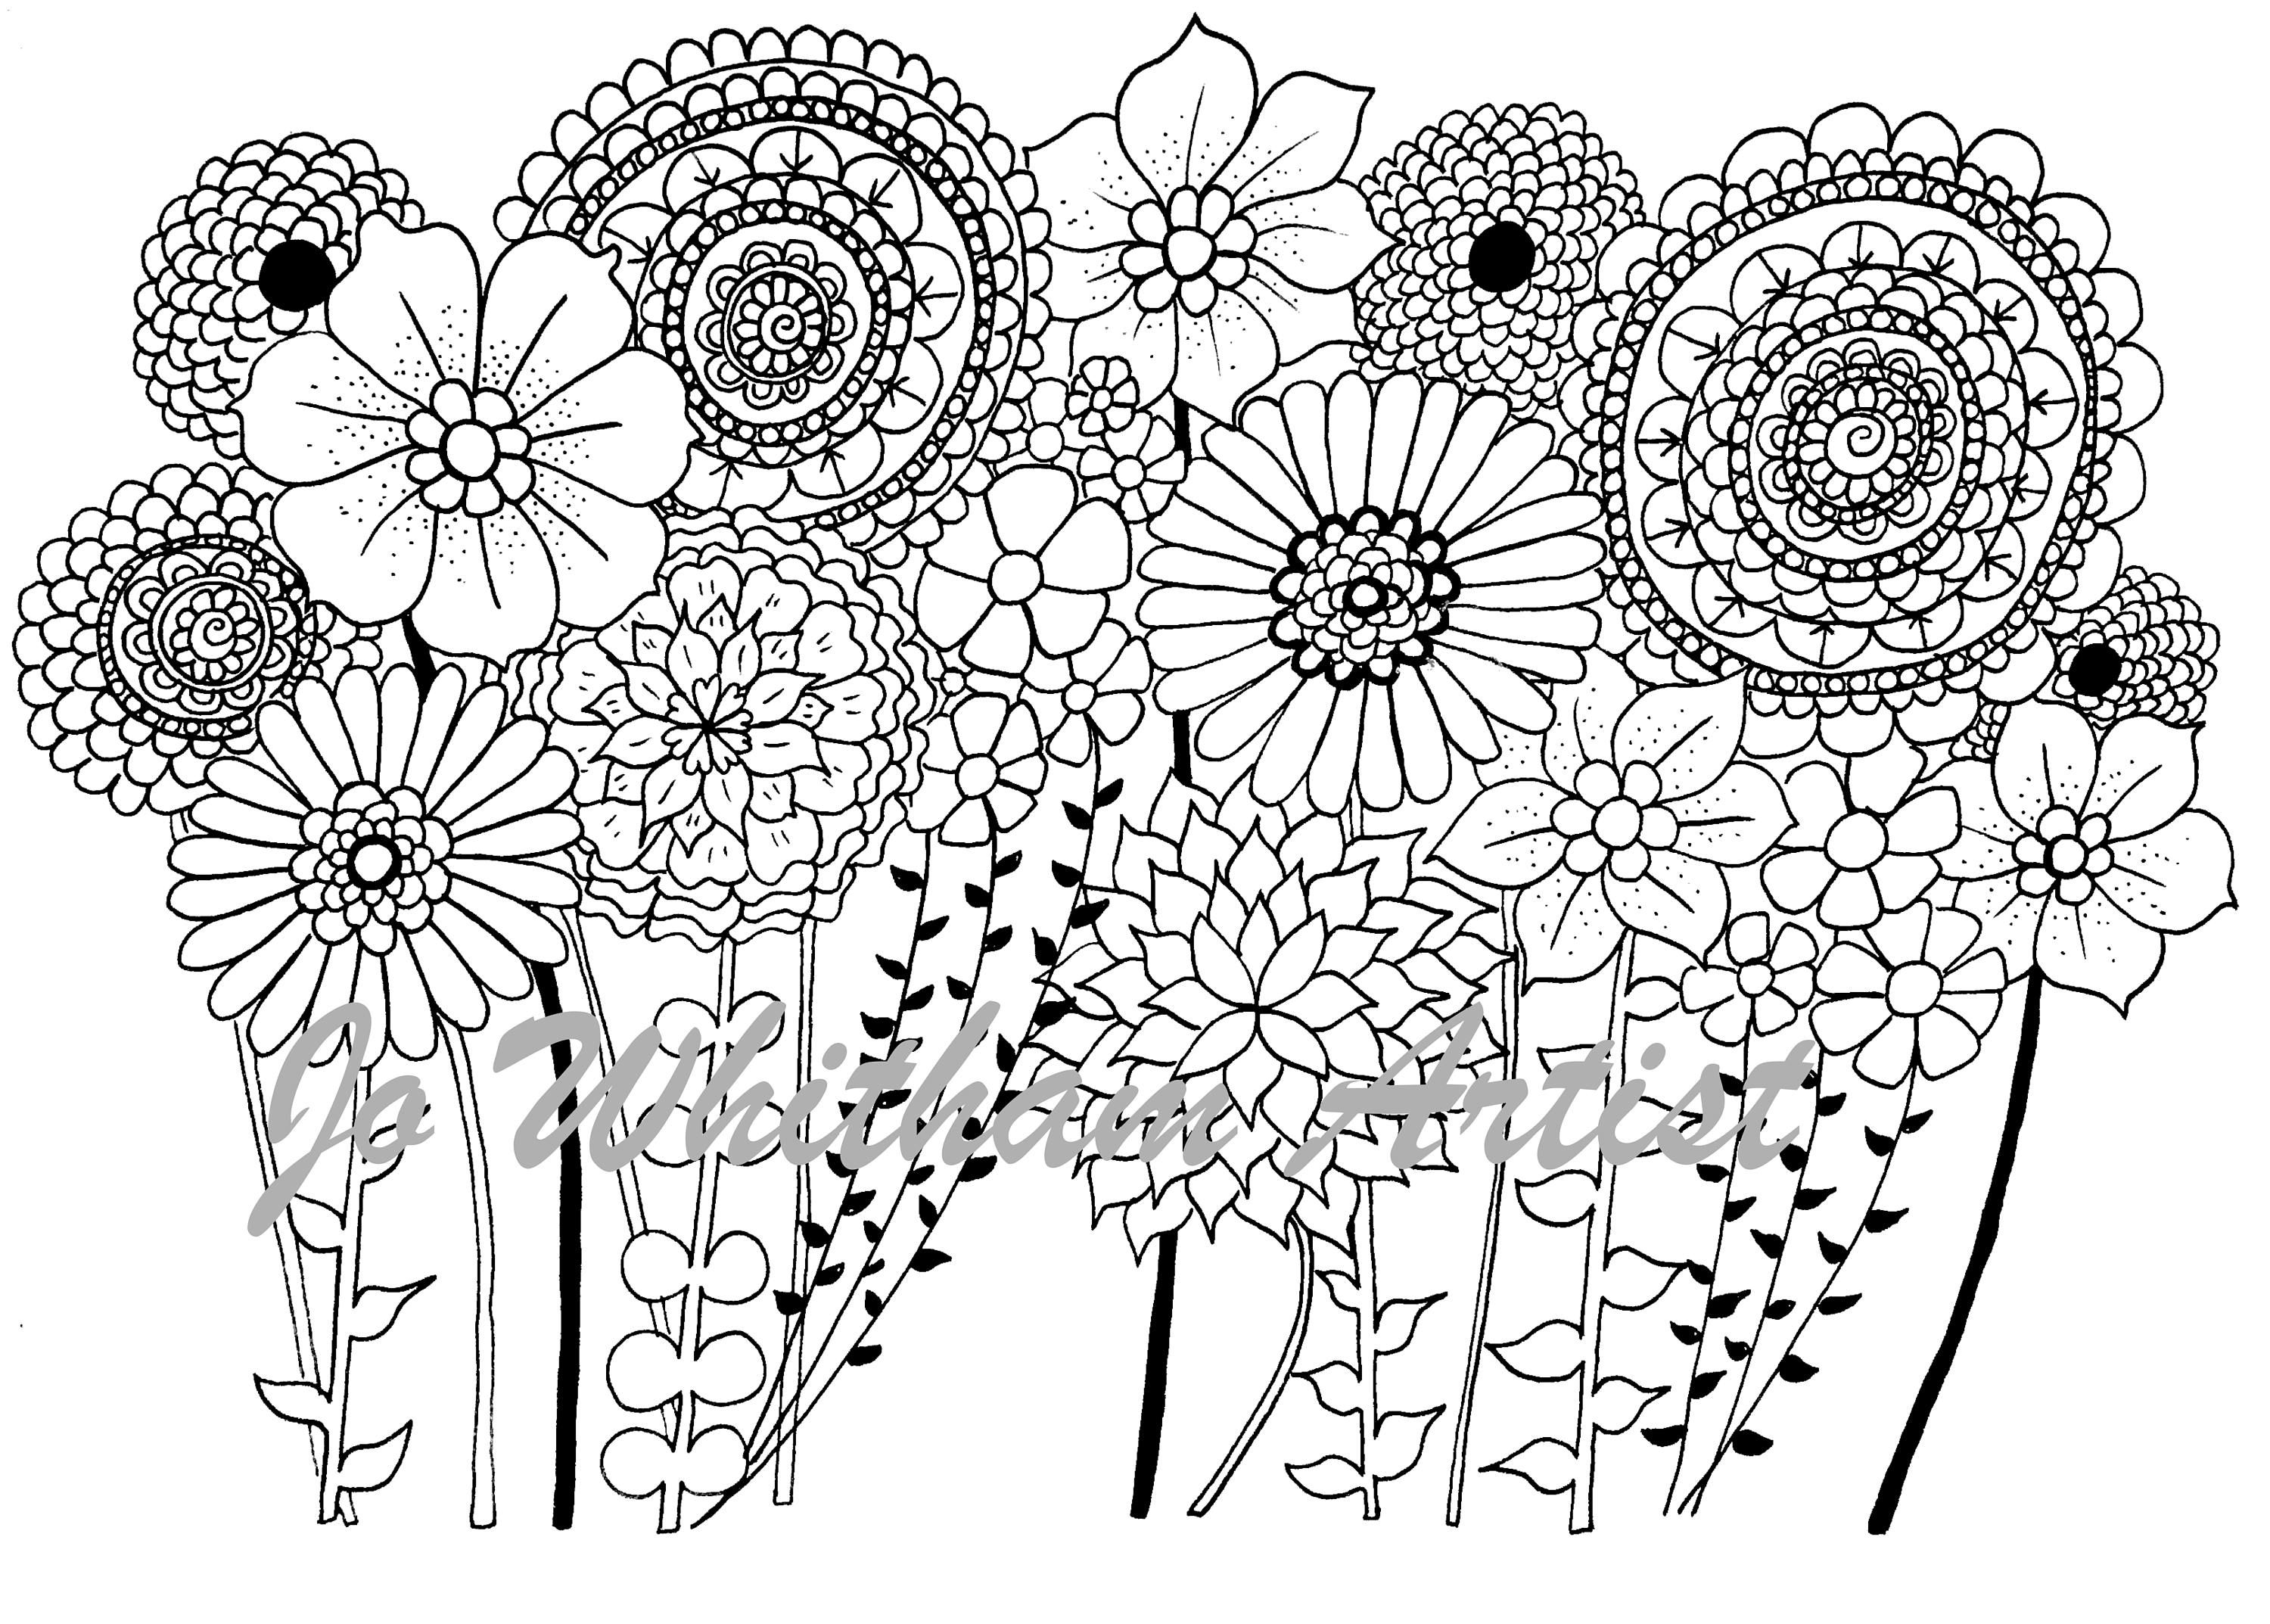 Wildflowers Coloring Page Digital Download Hand Illustrated | Etsy